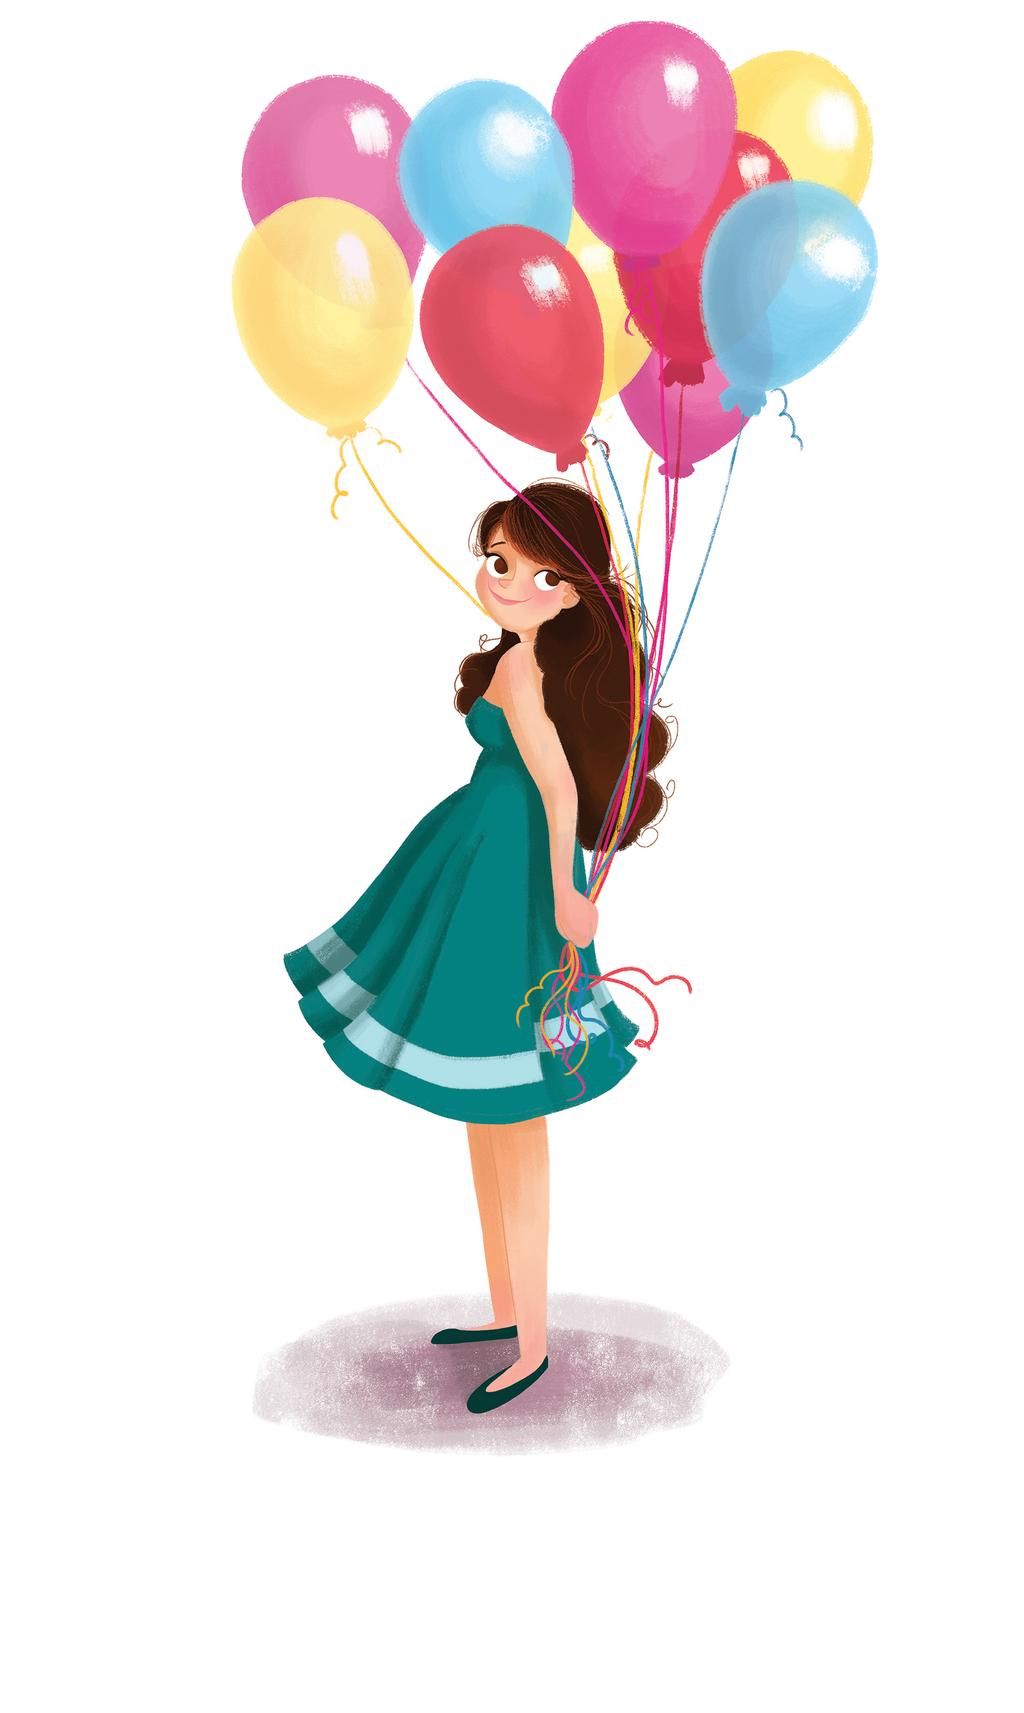 Girls With Balloon Reference ideas. its a girl balloons, balloons, birthday illustration